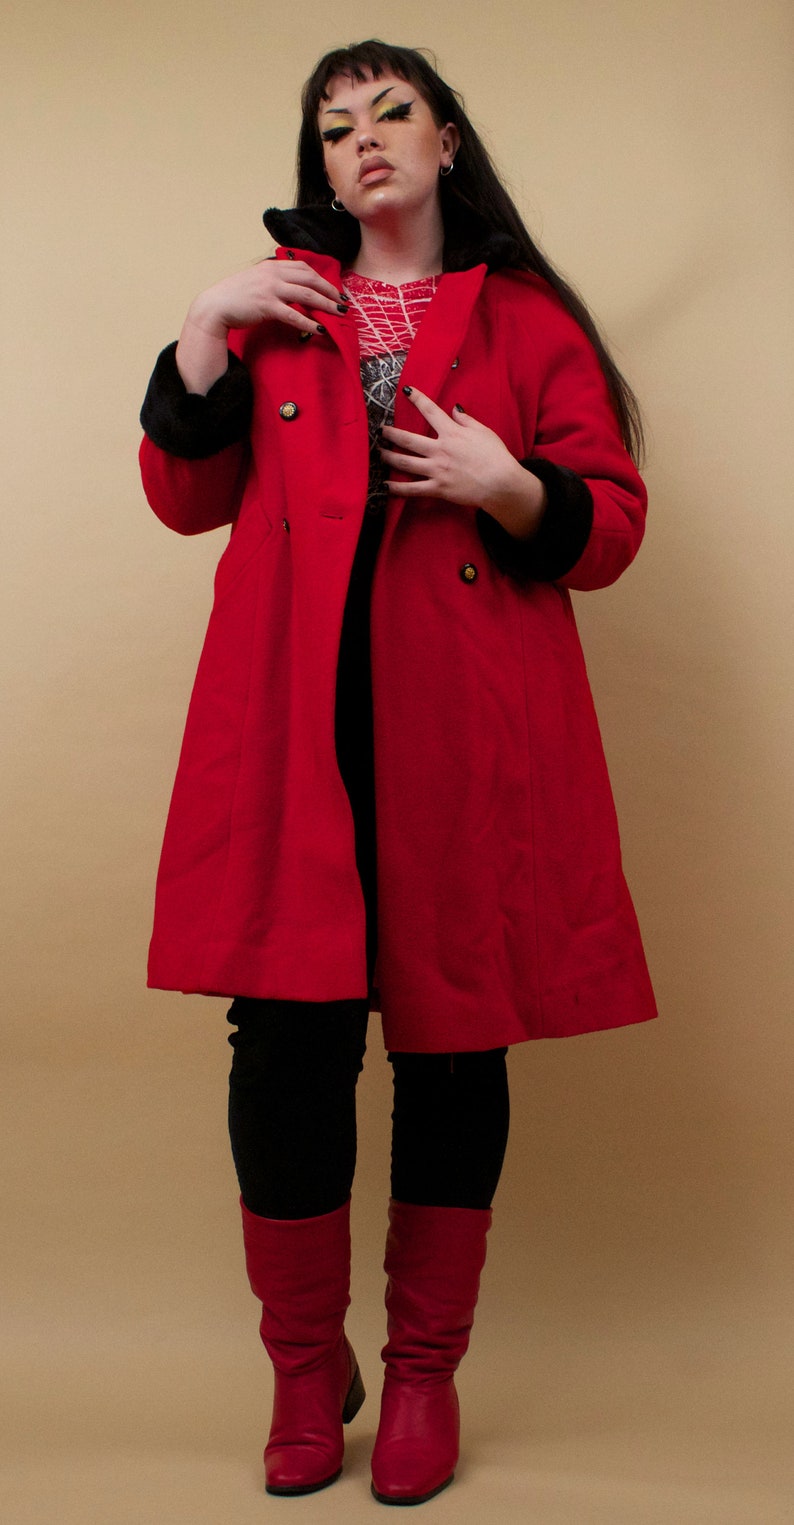 80s Vtg Rothschild Red & Black Faux Fur Wool Military Inspired Pea Coat Double Breasted Button Mock Collar Plus Size Designer L XL 12 tag 14 image 2